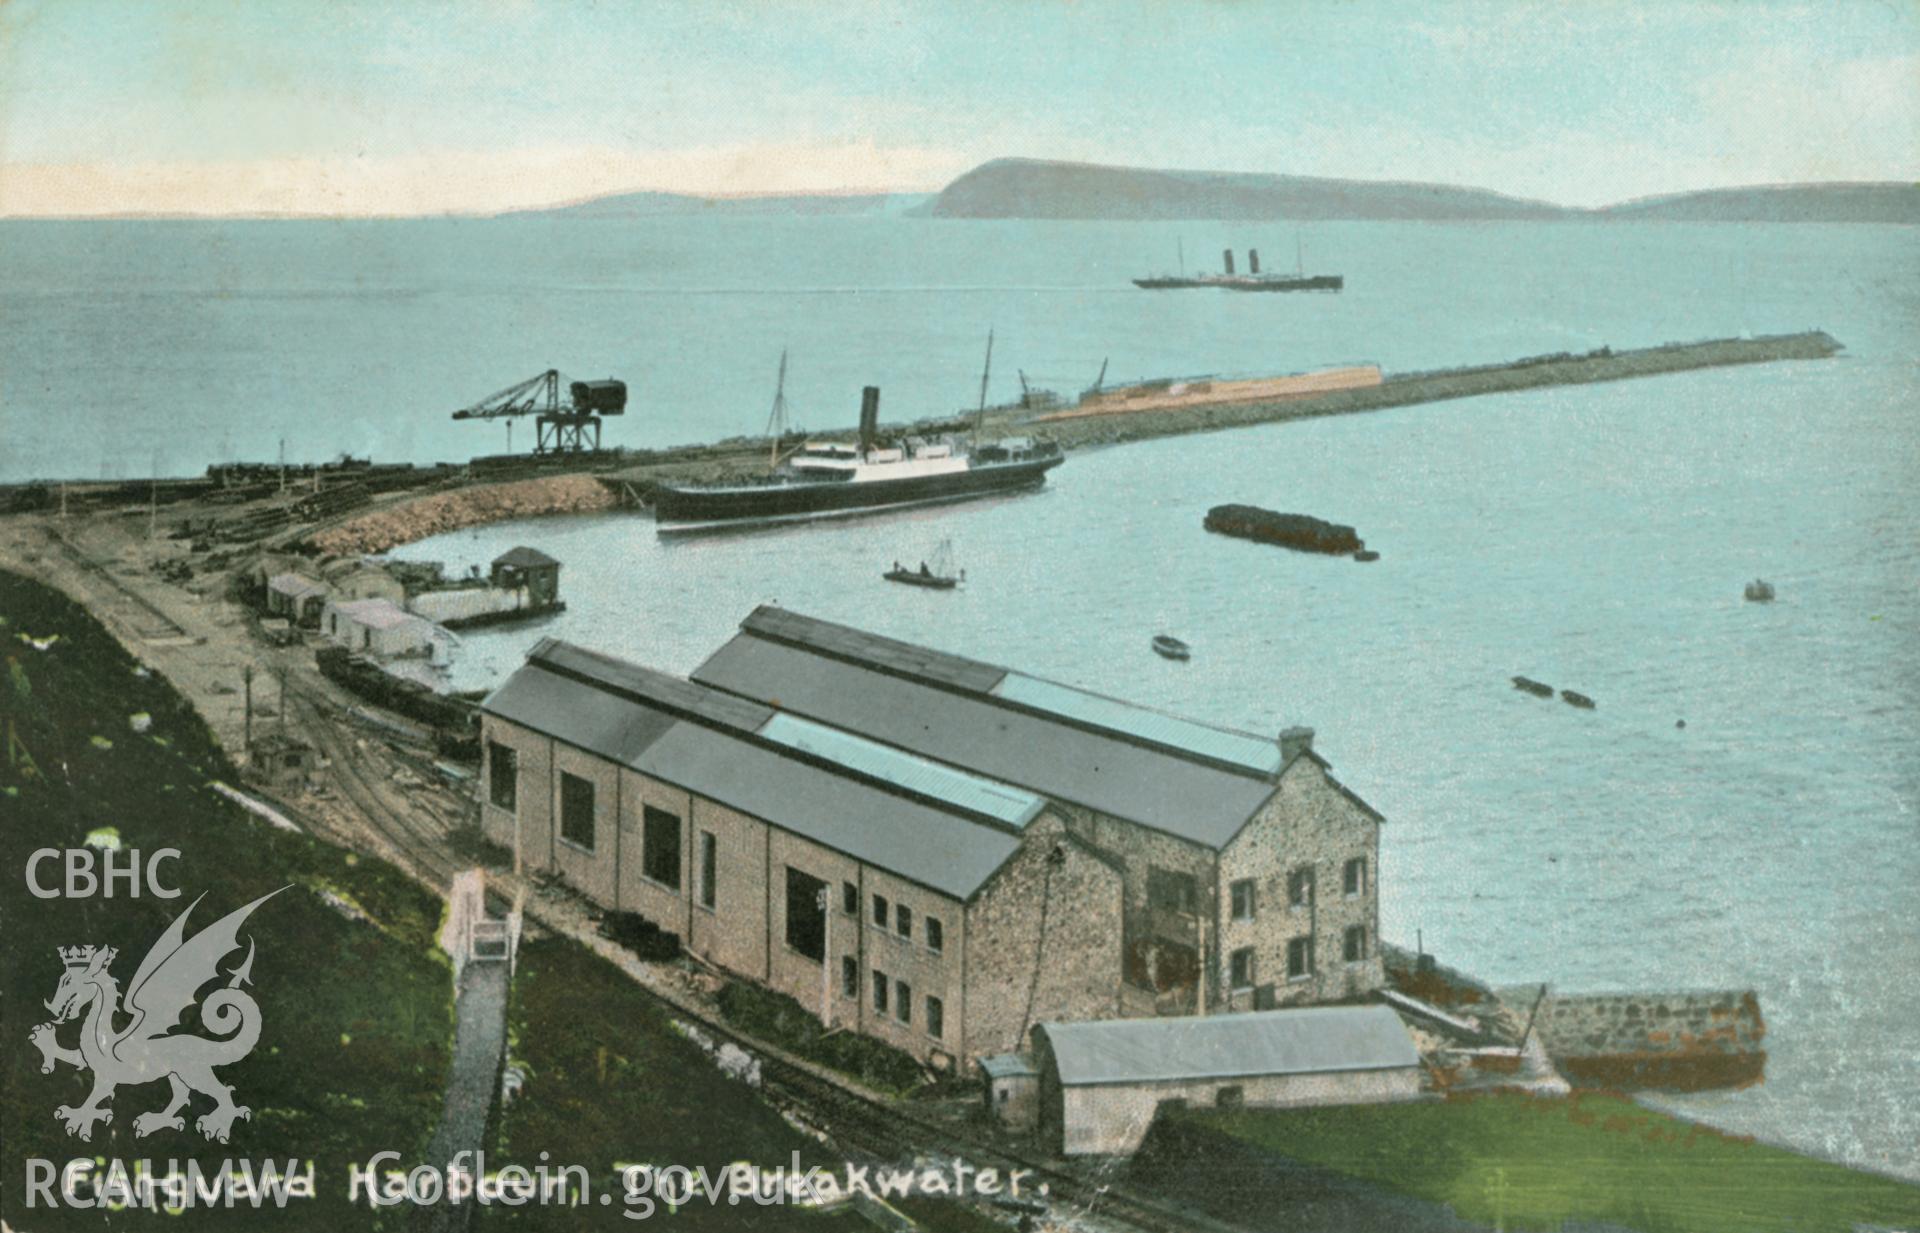 Fishguard Harbour; colour picture postcard, postmark July 1908., showing view of the breakwater at Fishguard with an elegant steam yacht (possibly a Trinity House vessel) moored alongside.